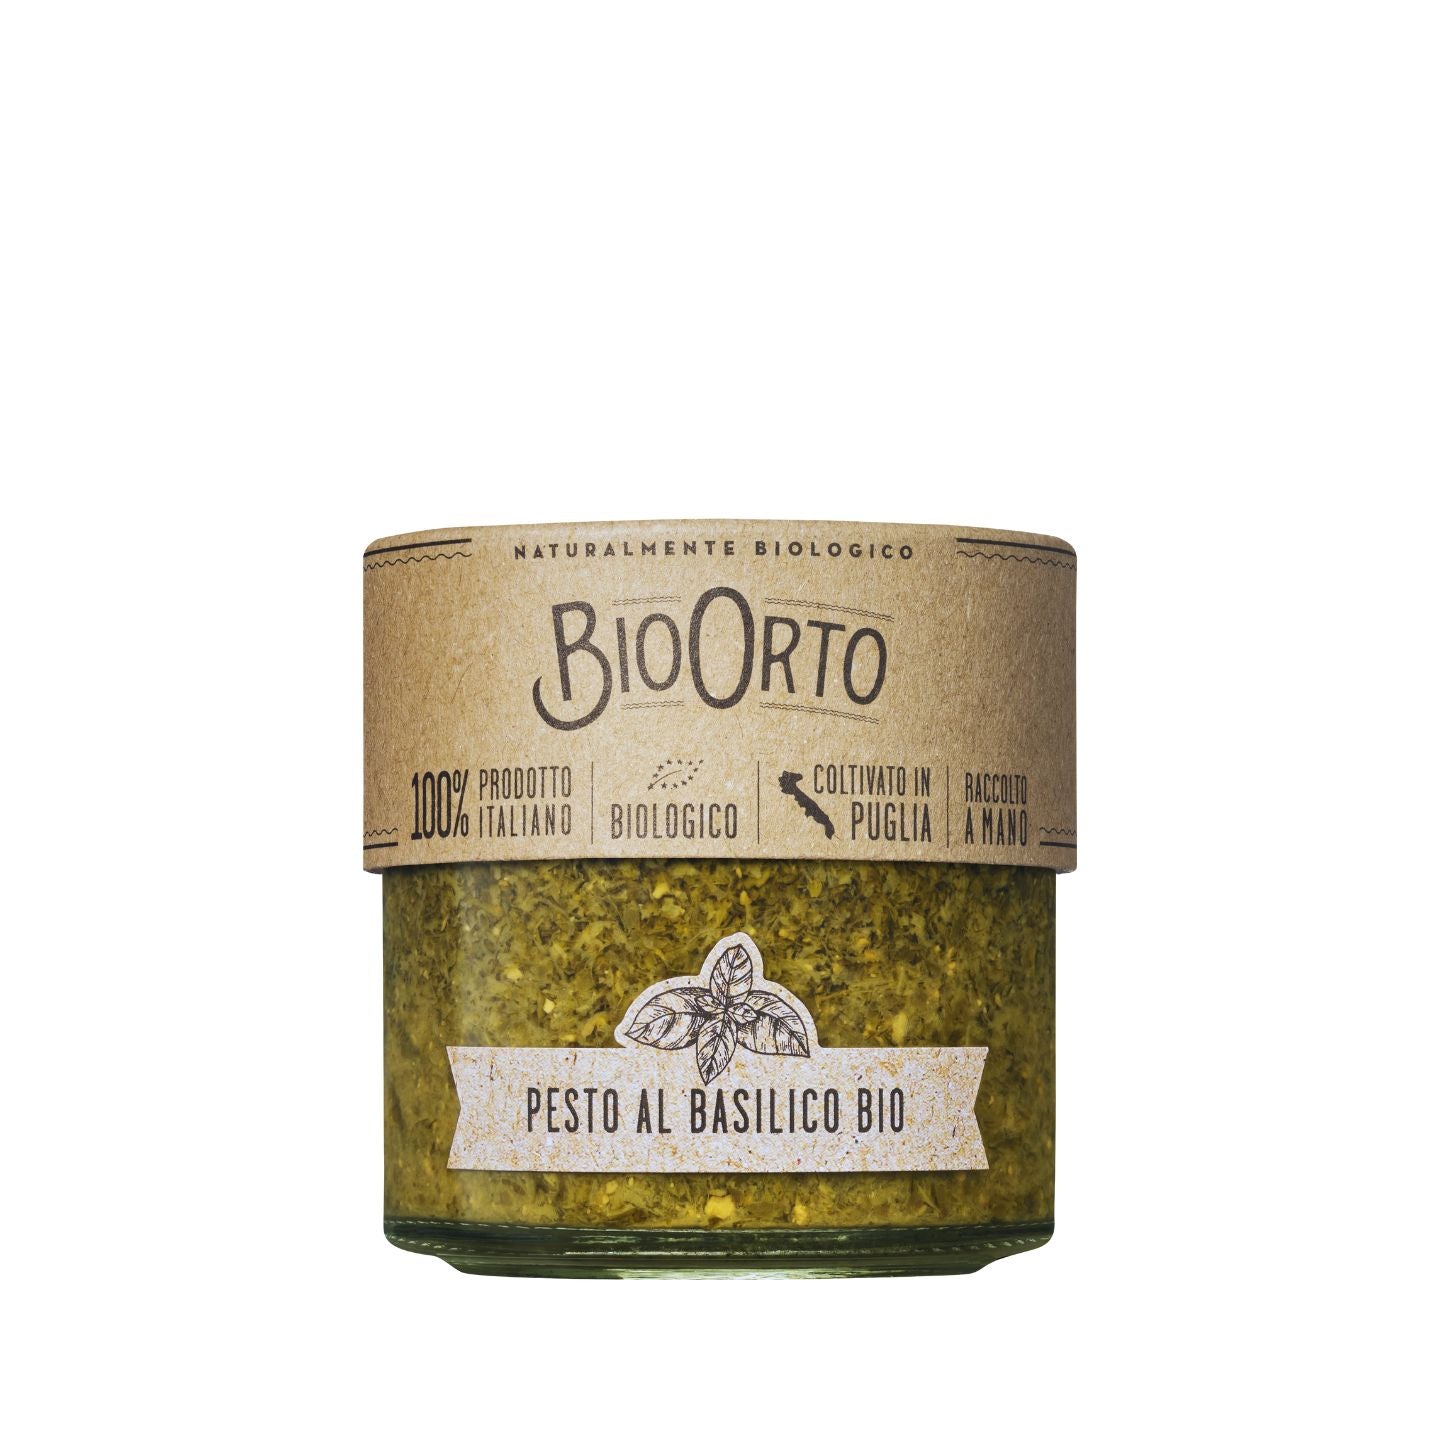 Bio Orto Organic Basil Pesto 180g  | Imported and distributed in the UK by Just Gourmet Foods